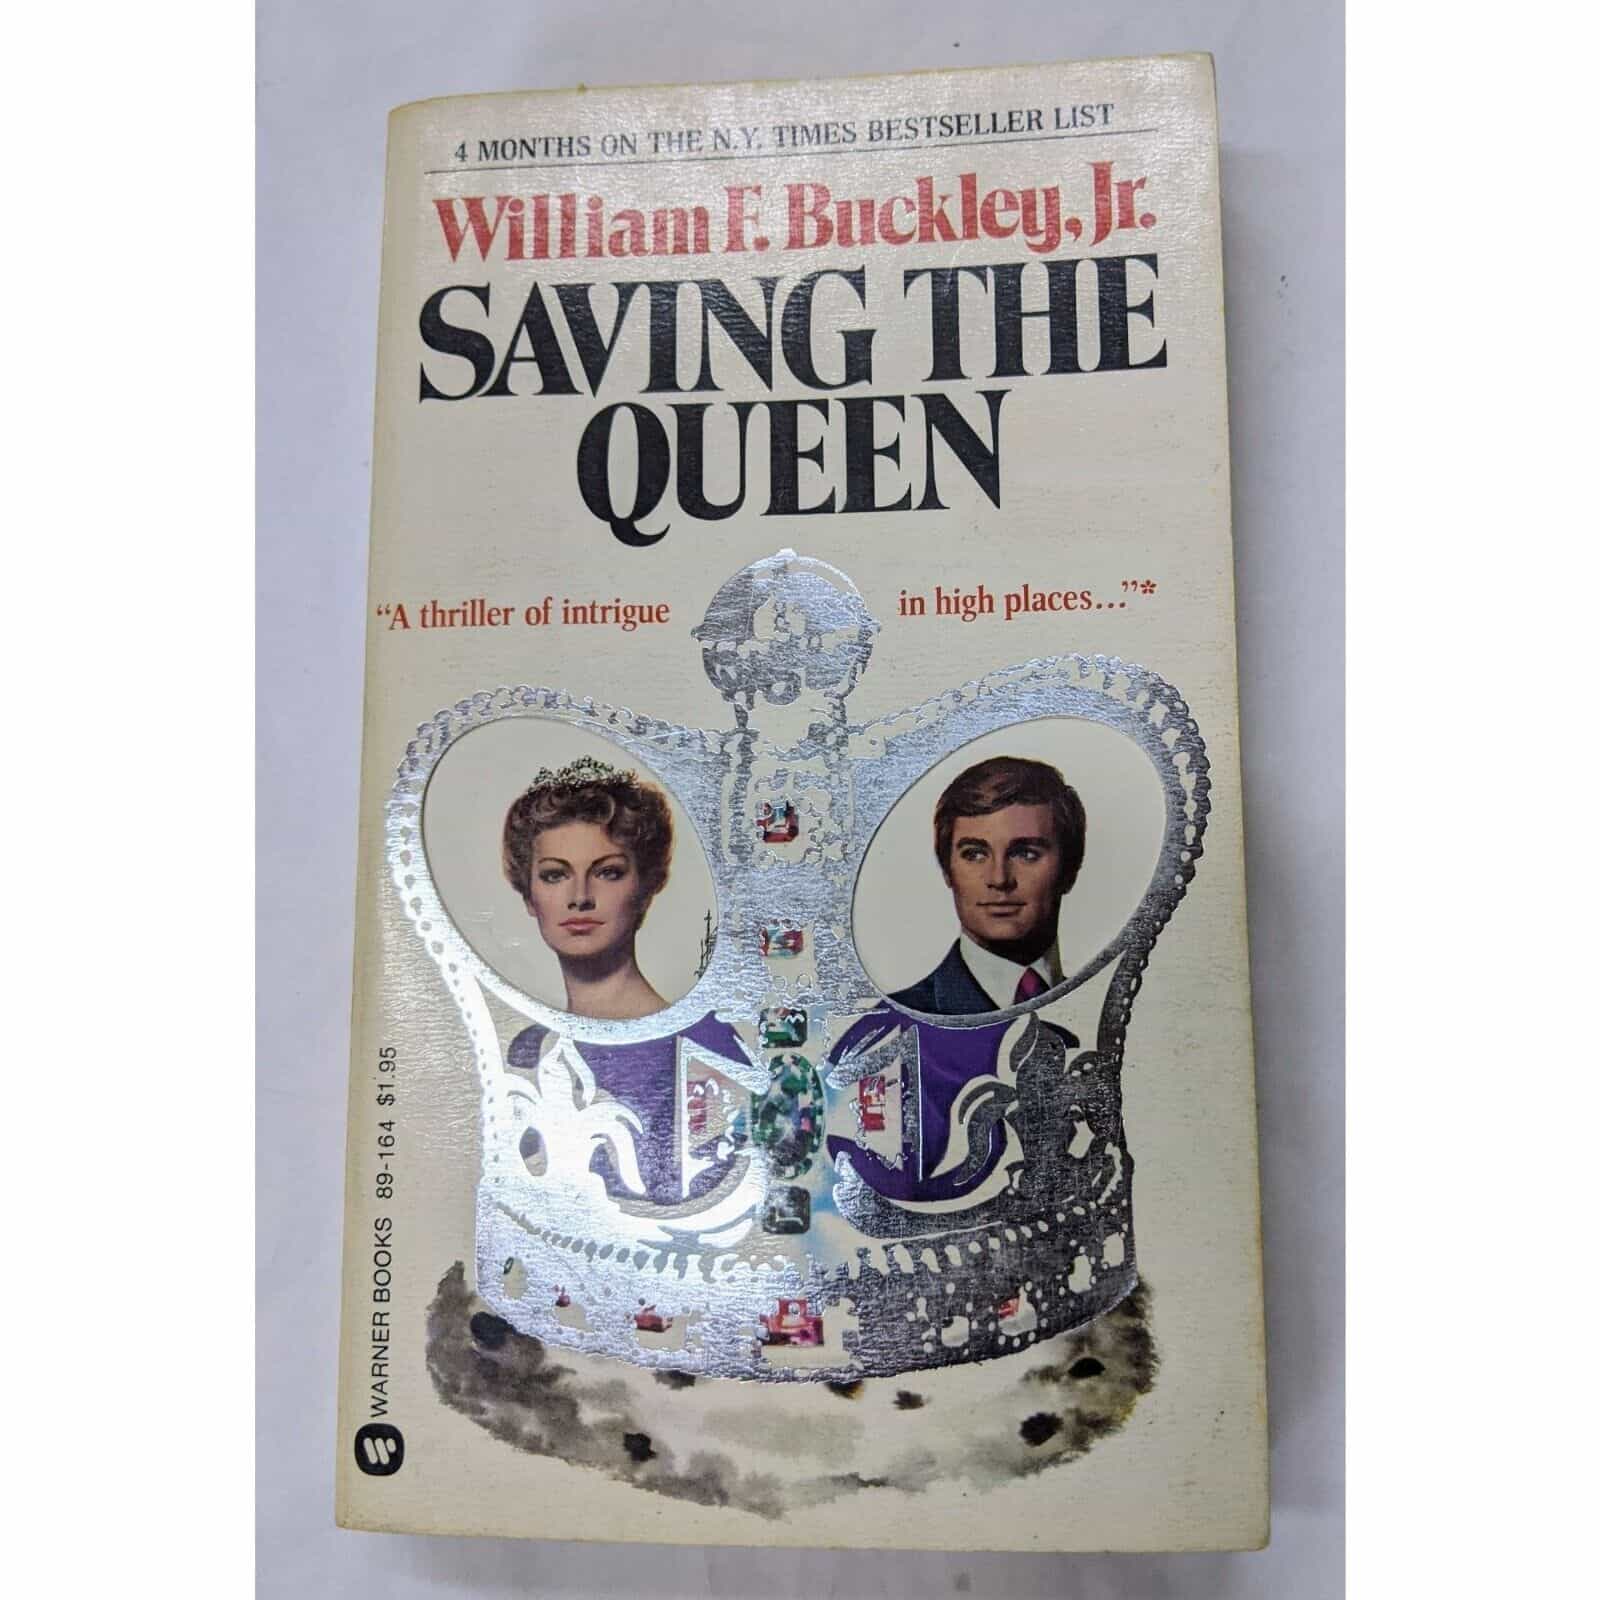 Saving The Queen by William F. Buckley, Jr. Book